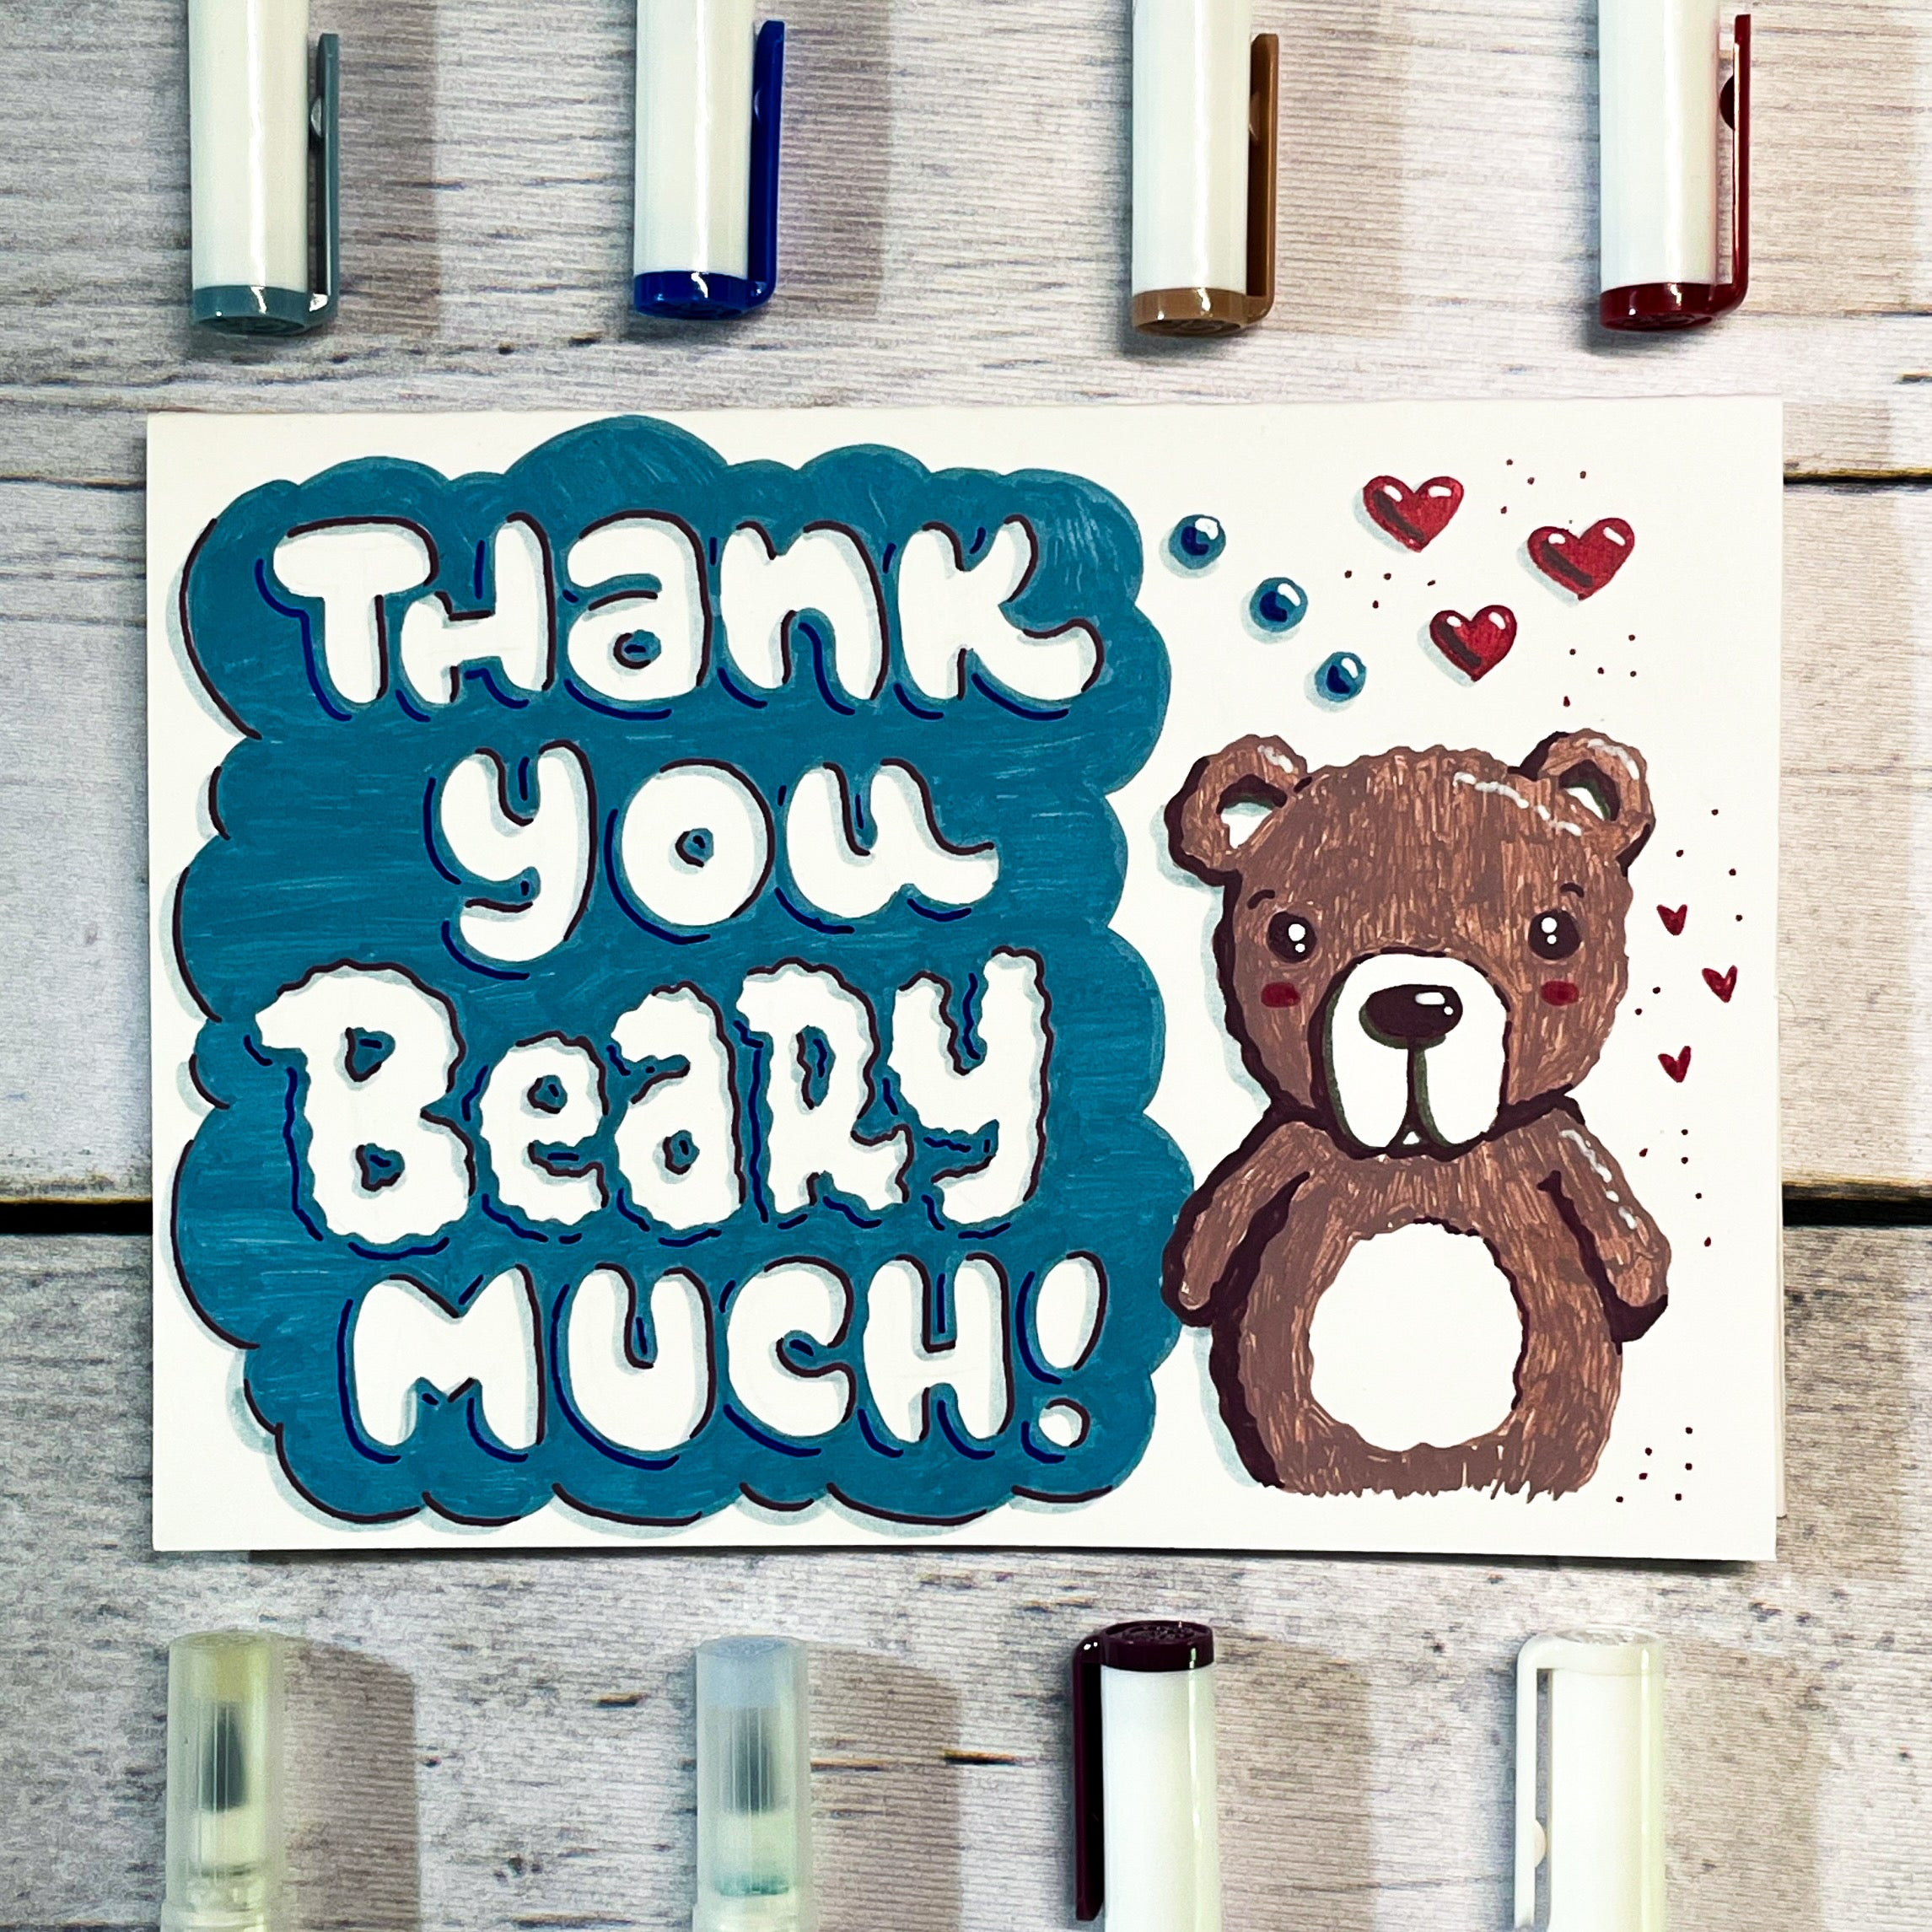 finished card design for "thank you beary much" with bear doodle and surrounded by archer and olive acrylographs and calliographs